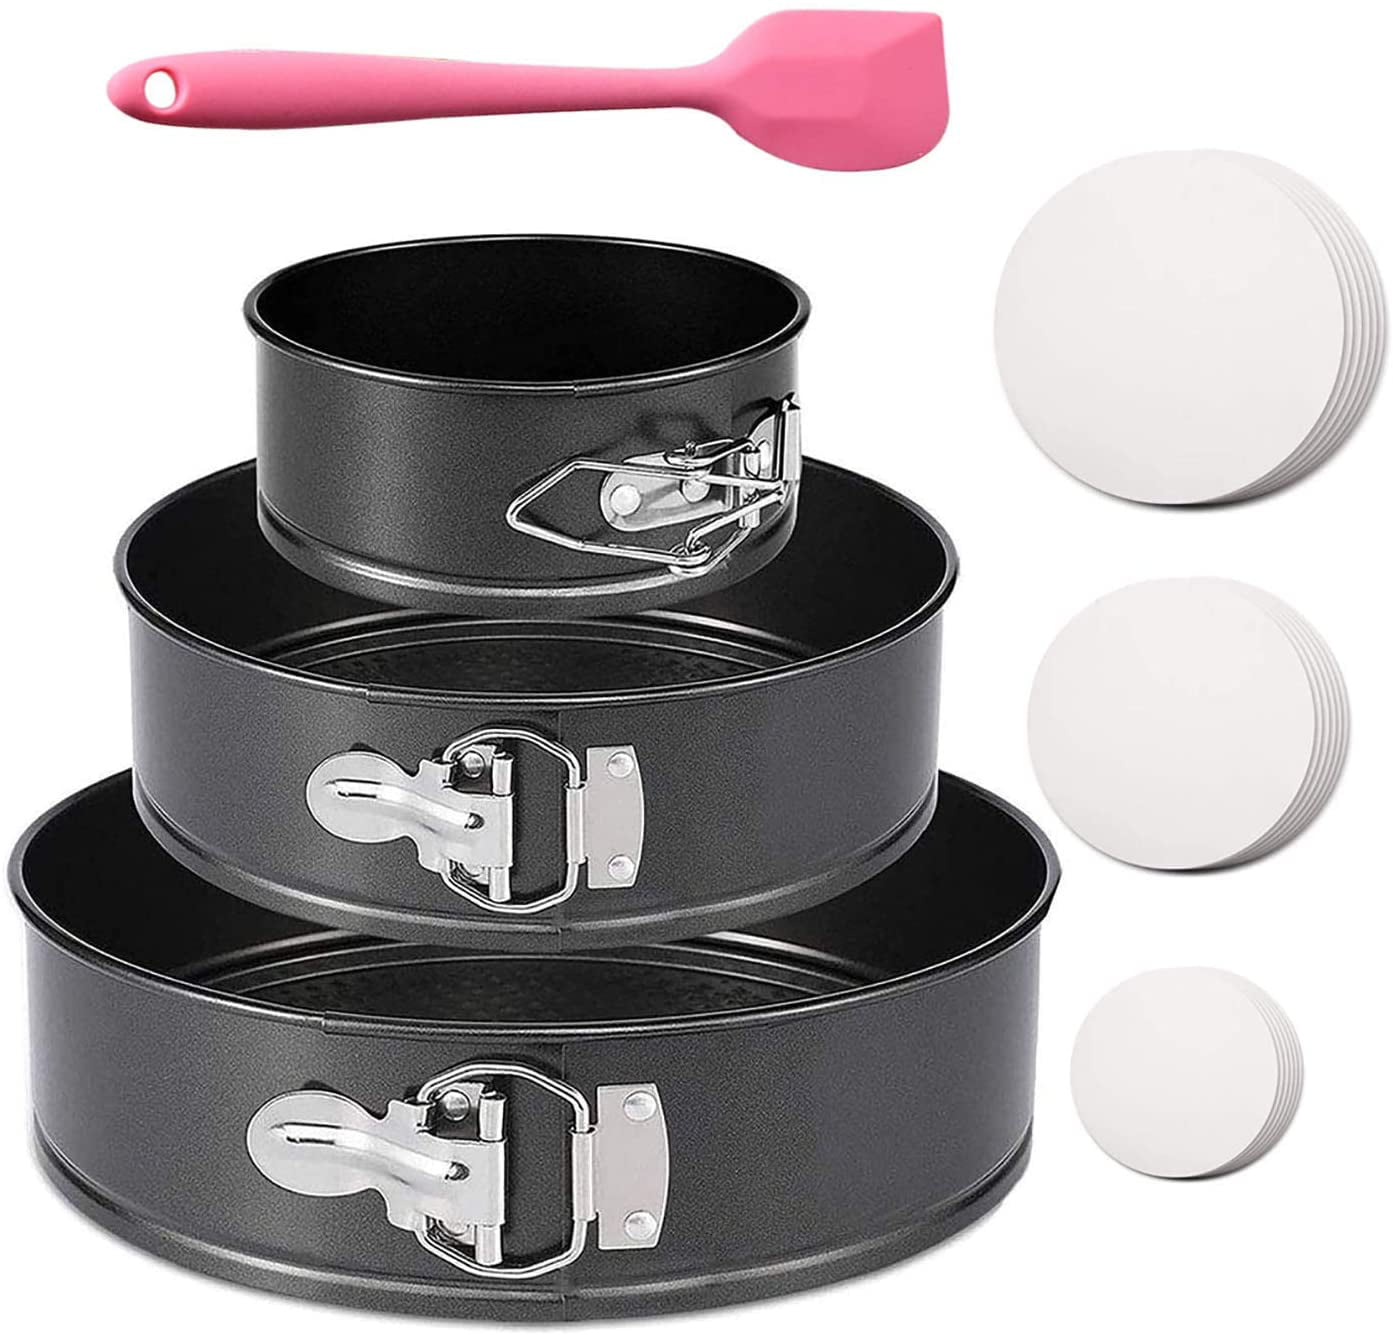 3Pcs Springform Pan set Non-stick Leakproof 4/7/9 Cake Pan Detachable Bakeware Leakproof Round Baking Pans with Parchment Paper Liners and Silicone Spatula for Baker and Baking Enthusiast